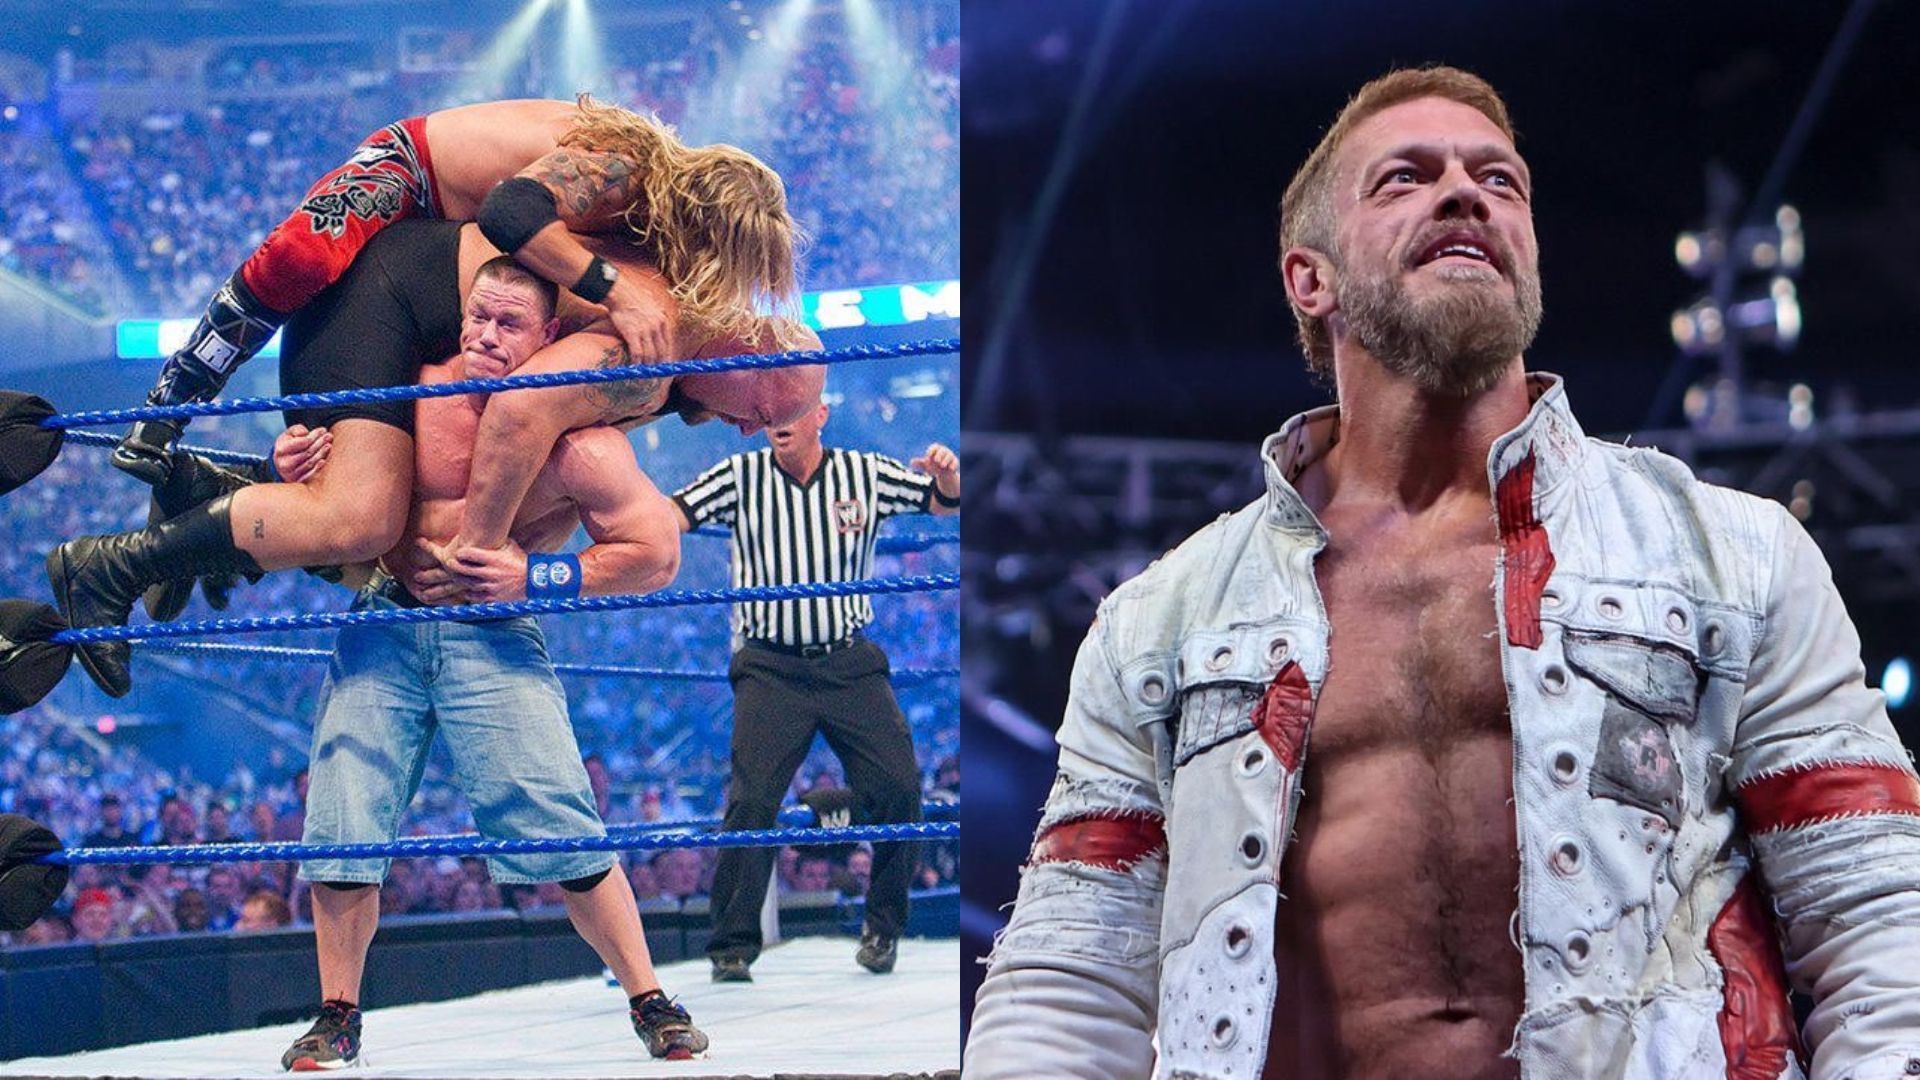 The two epic rivals have clashed on almost every stage in WWE